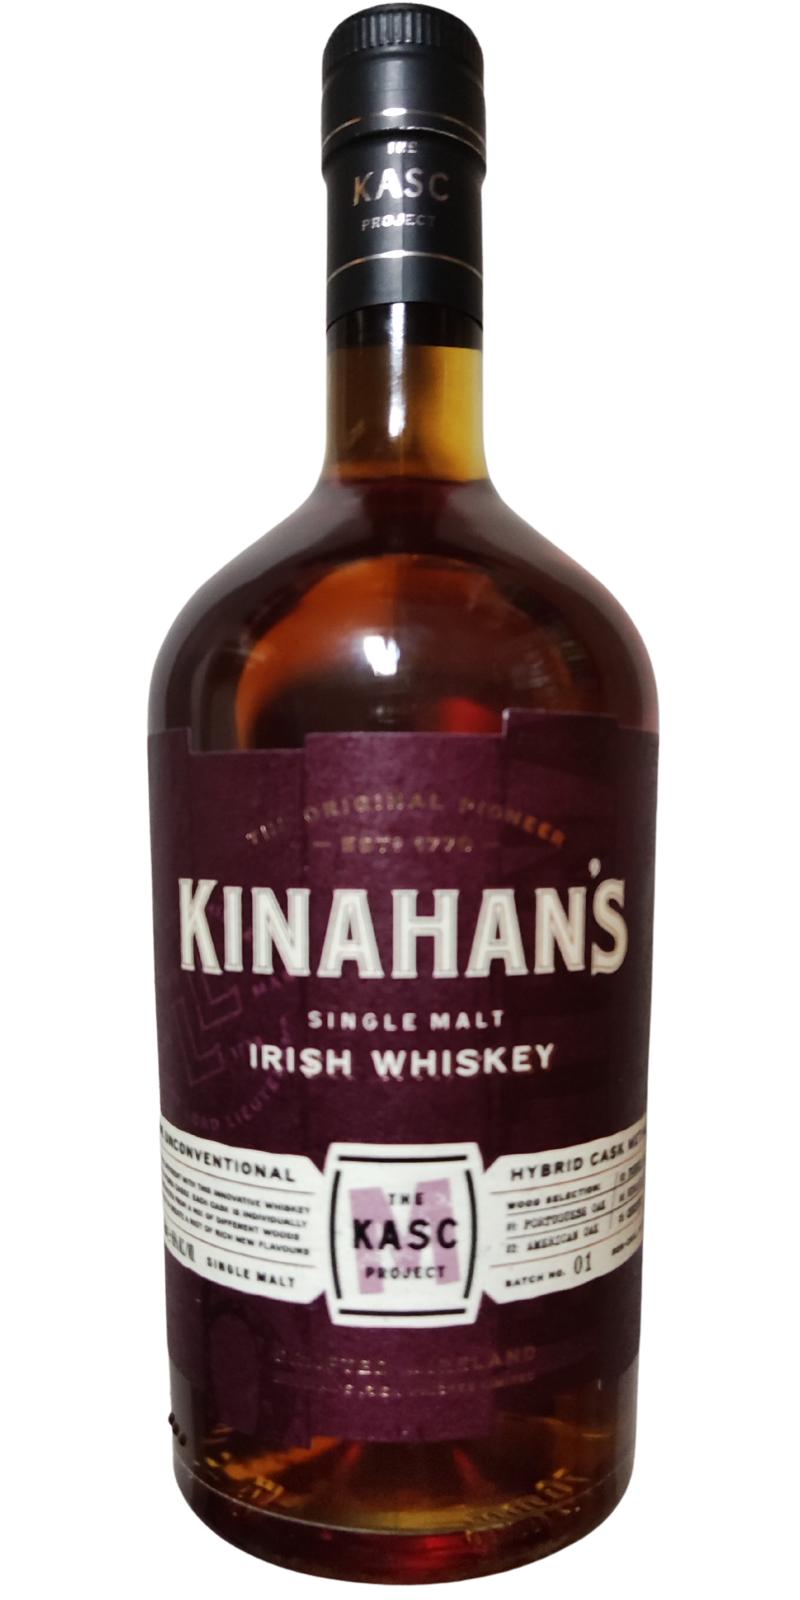 Kinahan's The Kasc Project - Ratings and reviews - Whiskybase